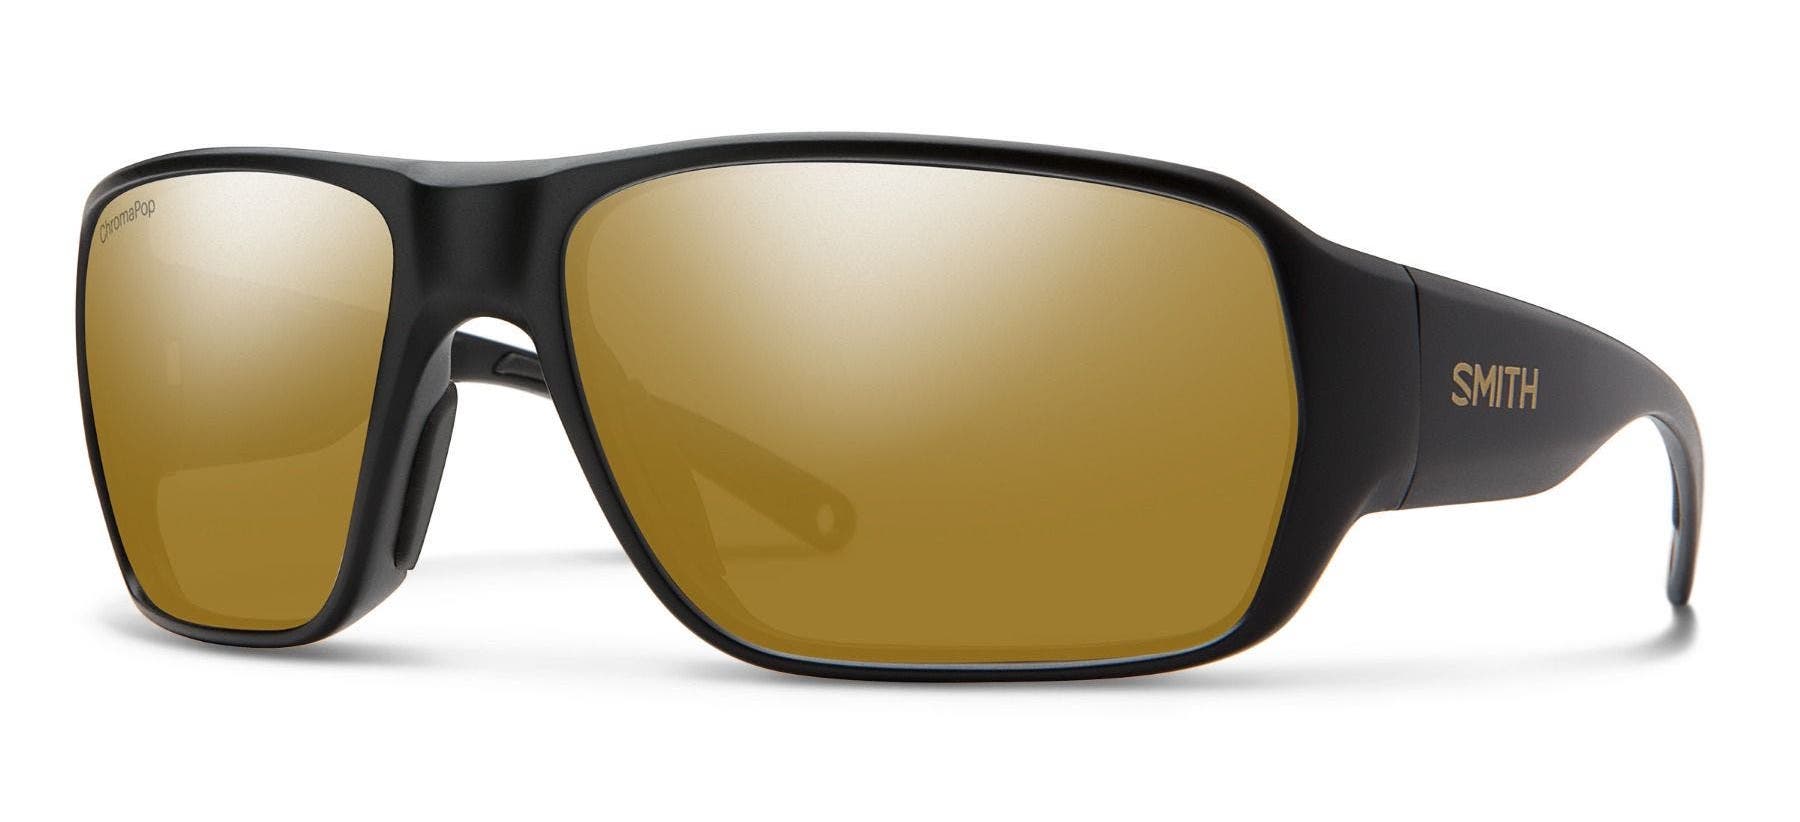 smith castaway sunglasses in black with bronze polarized lenses